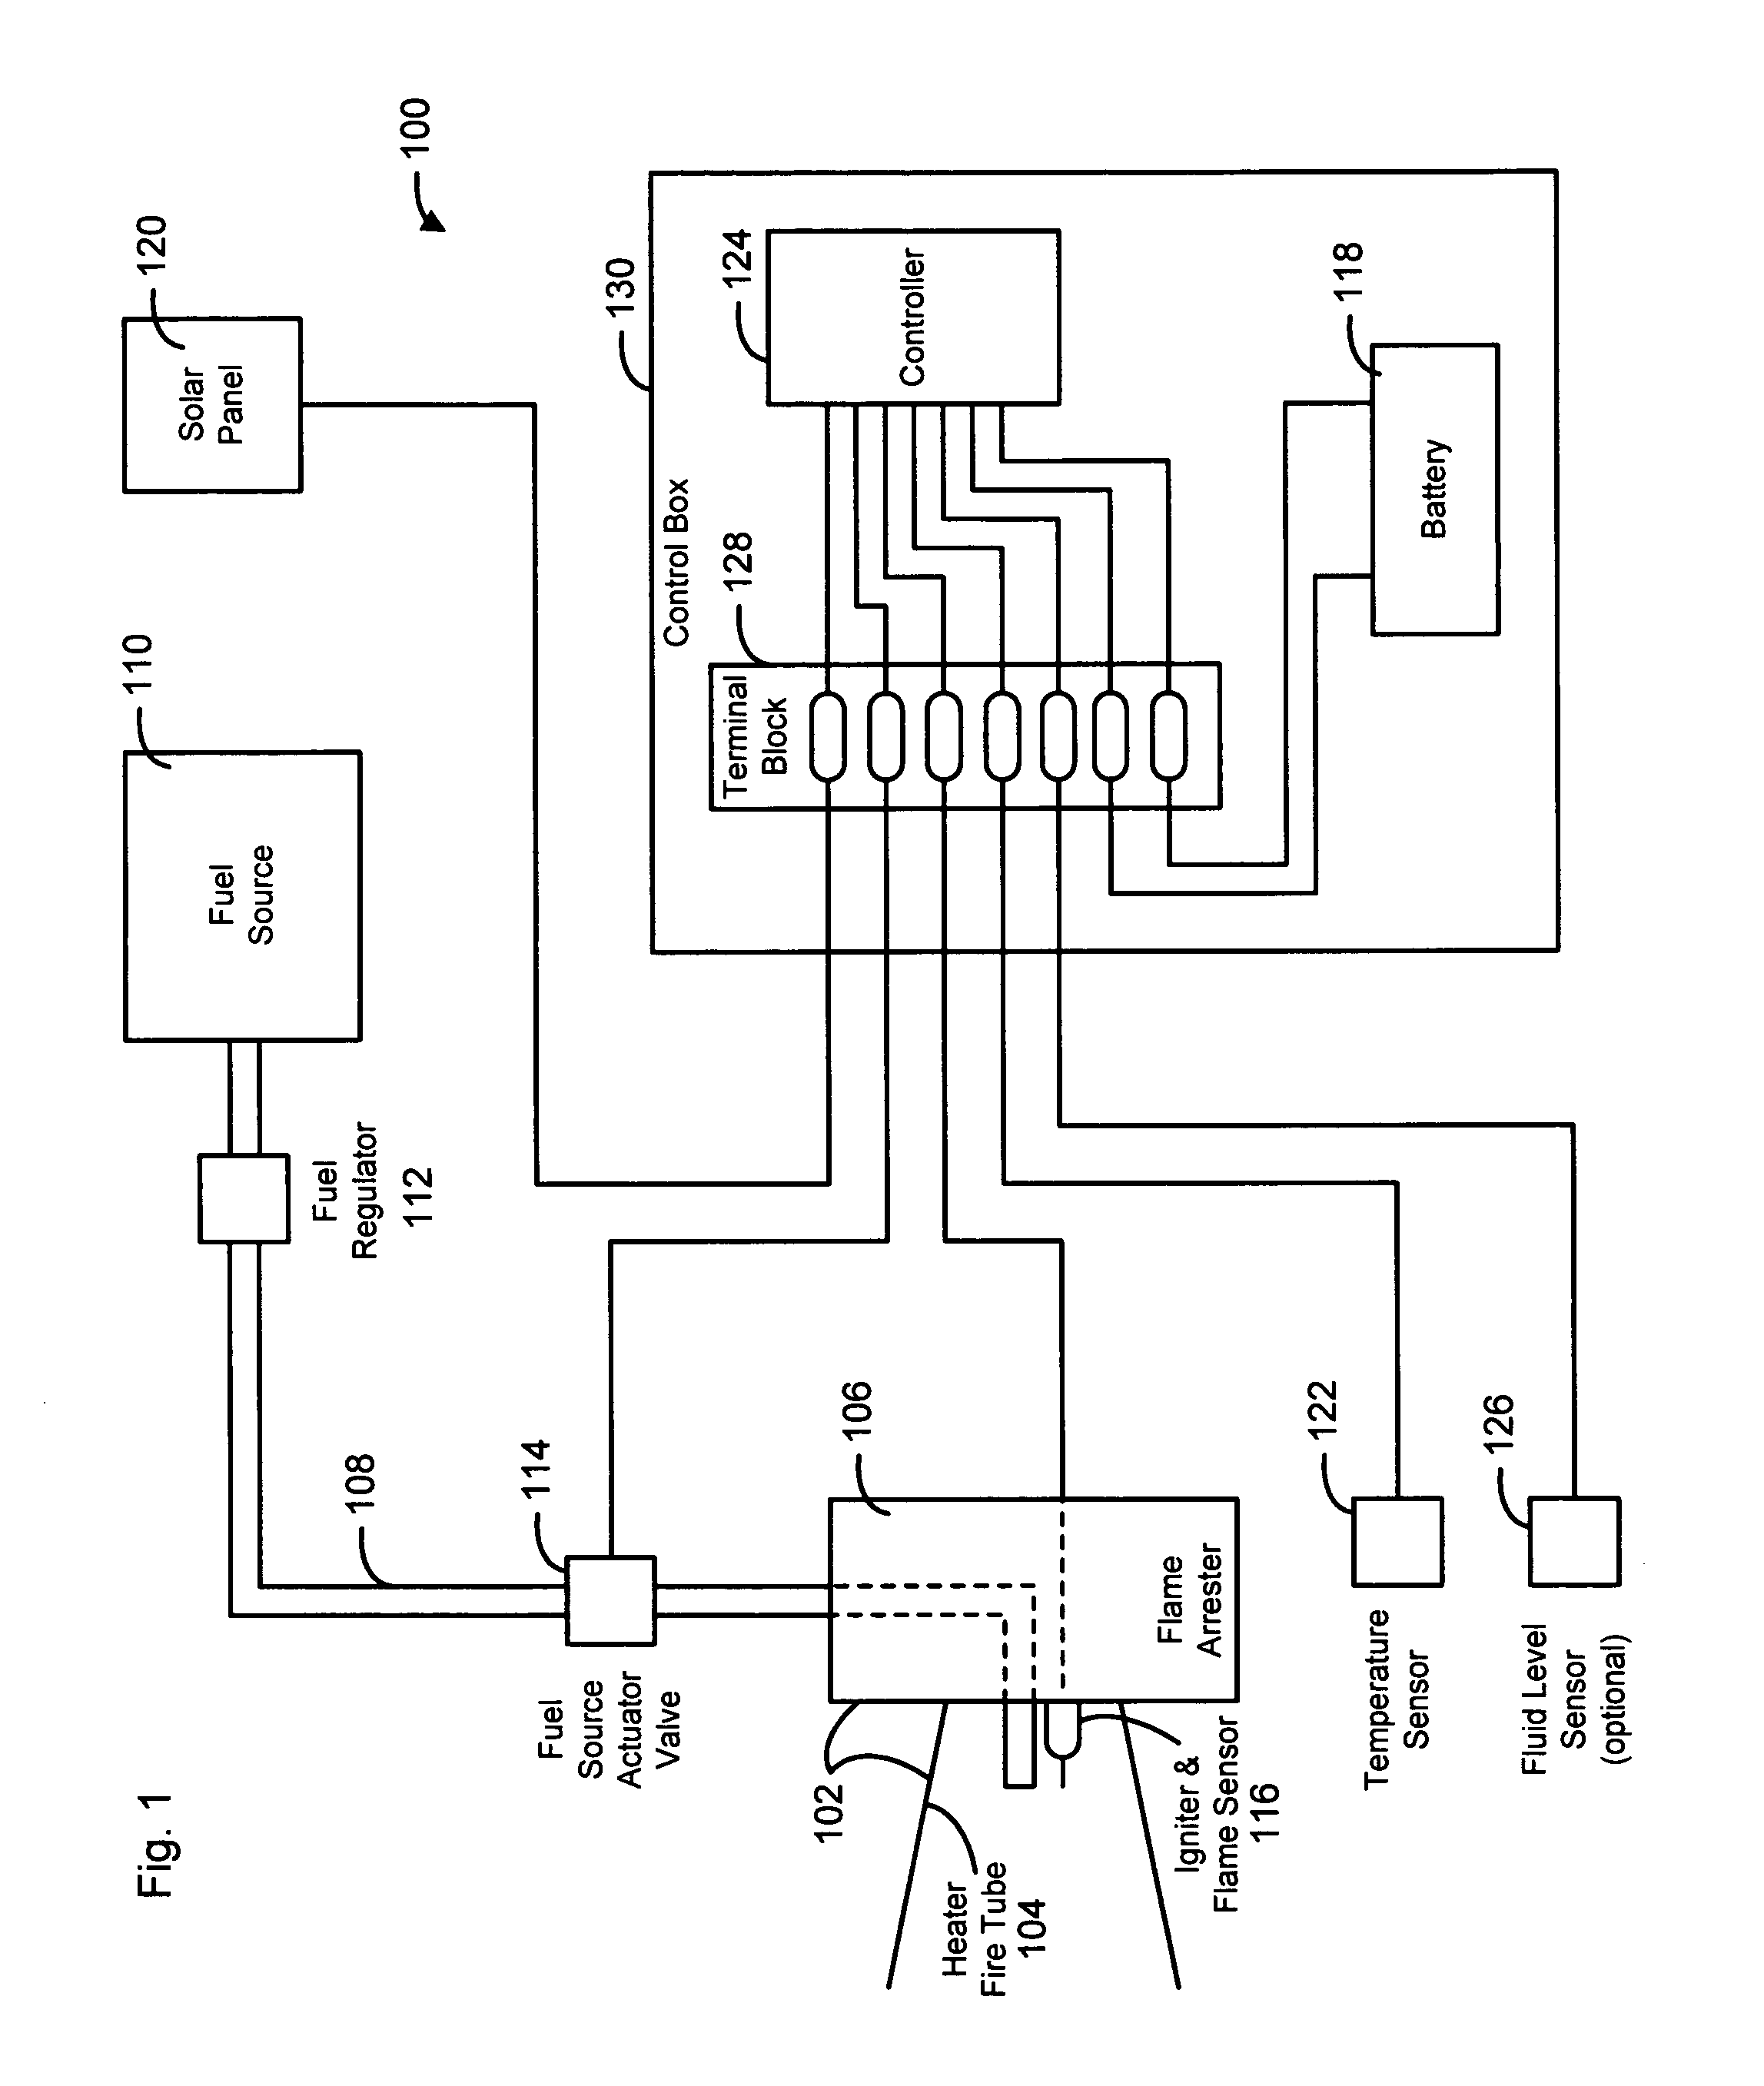 Method, apparatus and system for controlling a gas-fired heater